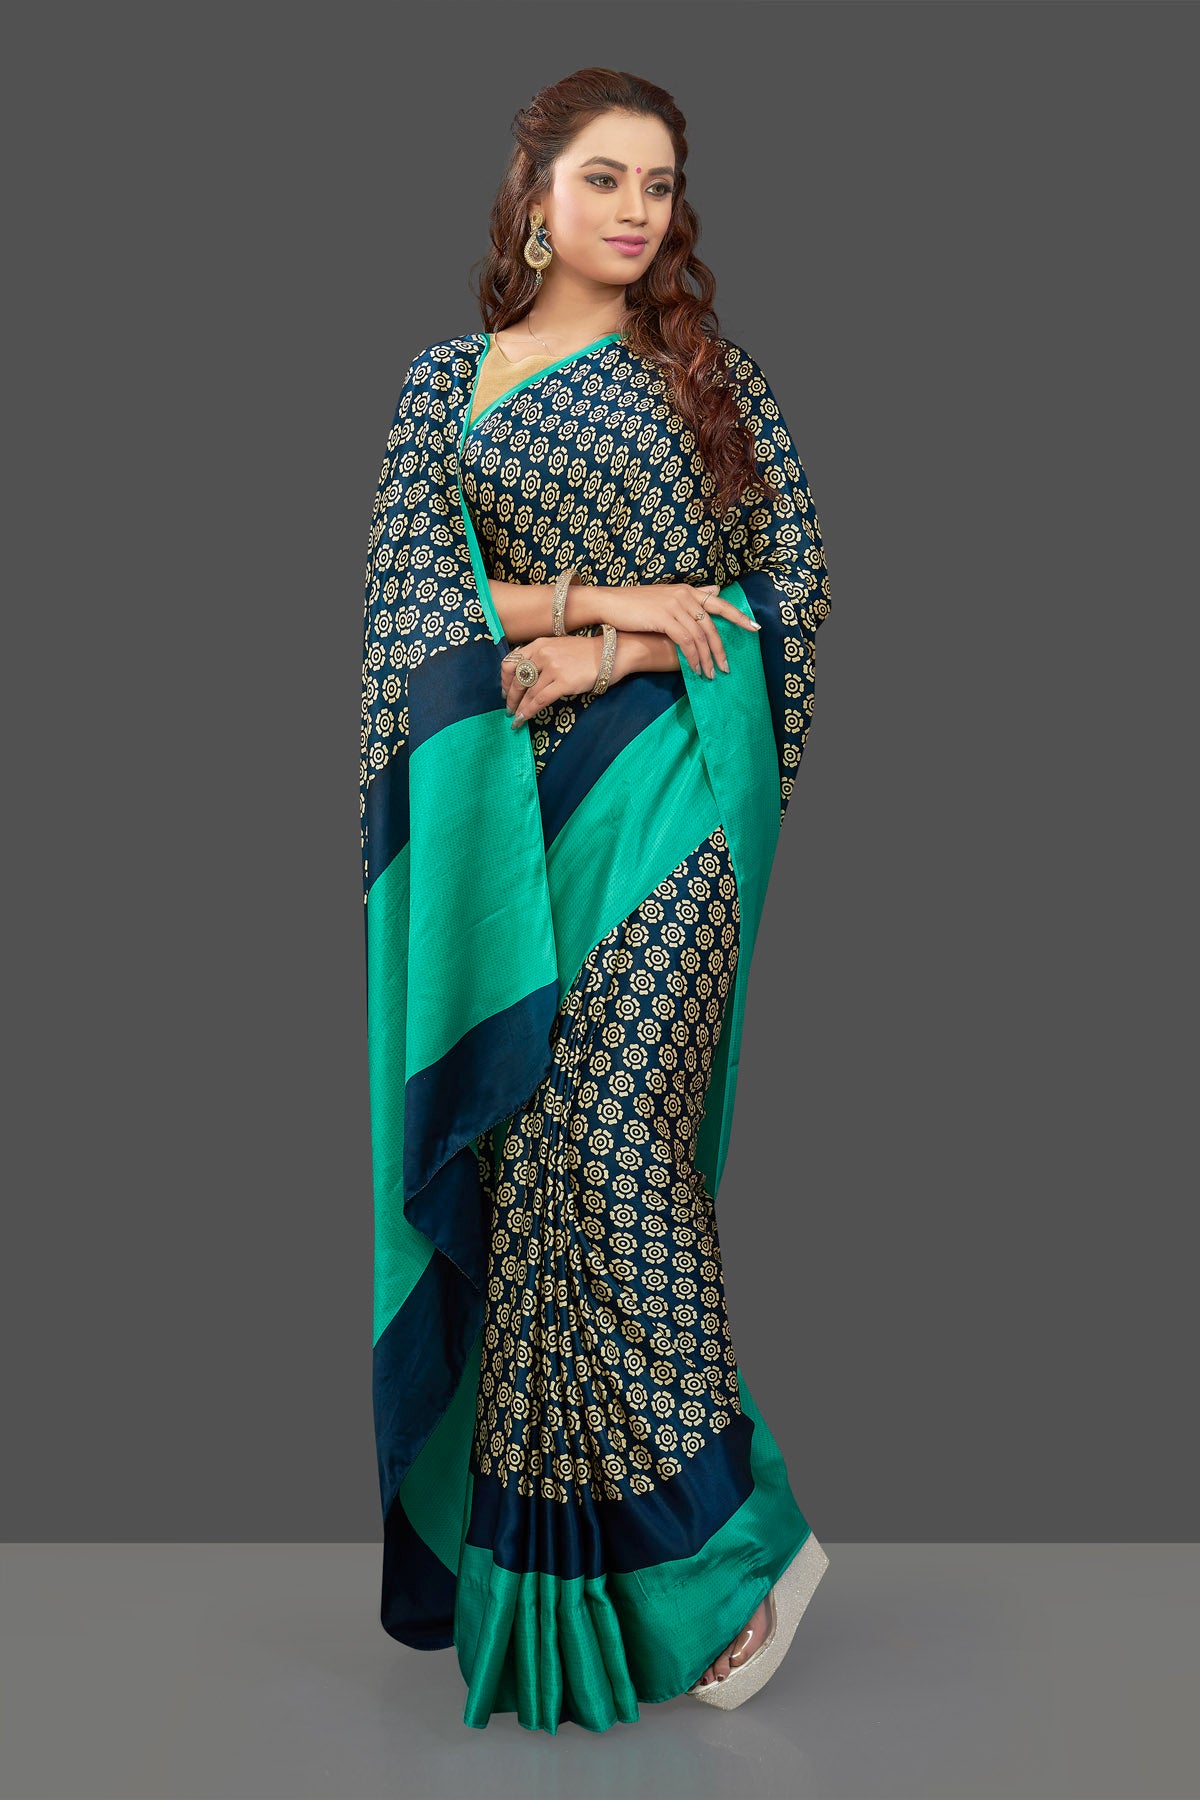 Buy elegant dark blue crepe silk sari online in USA with solid green border. Elevate your Indian style on special occasions in beautiful designer sarees, crepe silk sarees, georgette saris, printed sarees from Pure Elegance Indian clothing store in USA.-front